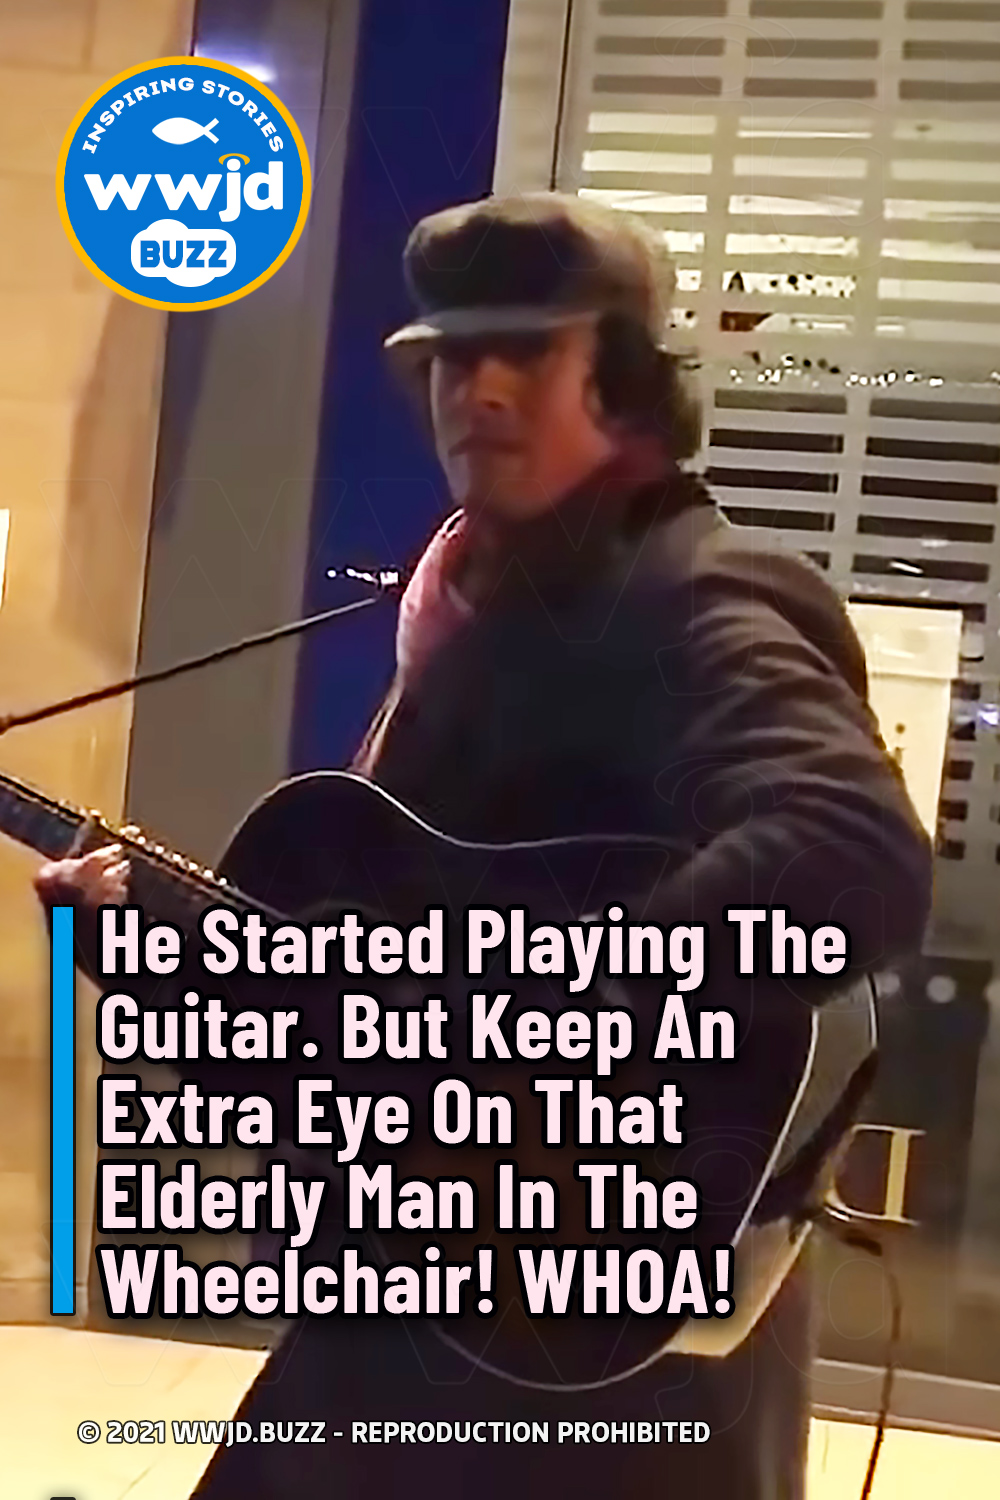 He Started Playing The Guitar. But Keep An Extra Eye On That Elderly Man In The Wheelchair! WHOA!